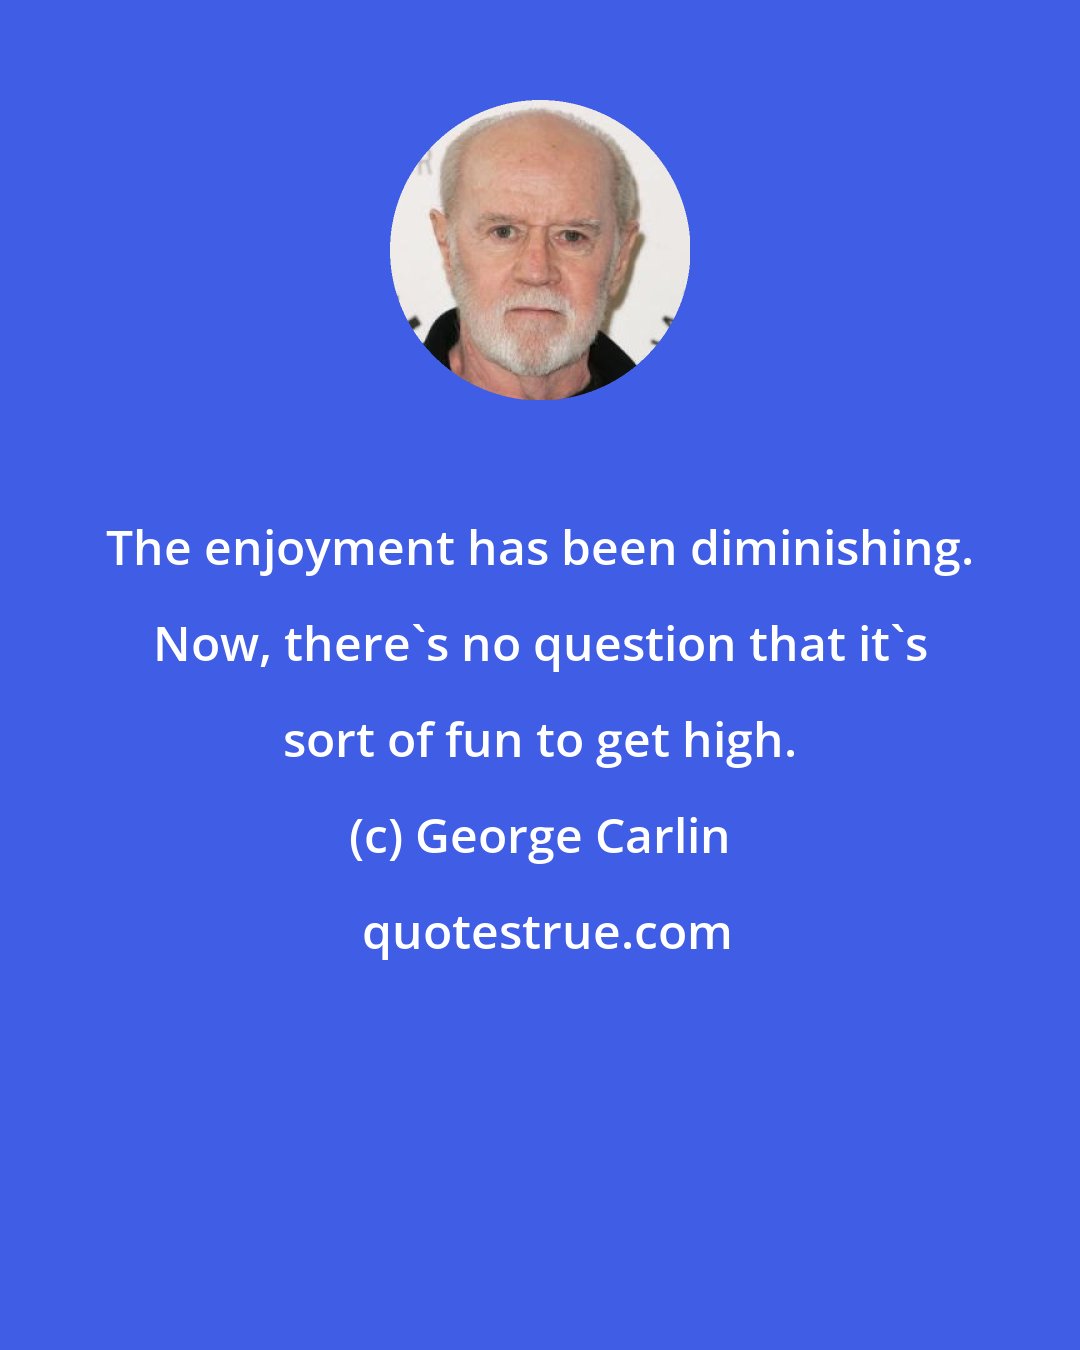 George Carlin: The enjoyment has been diminishing. Now, there's no question that it's sort of fun to get high.